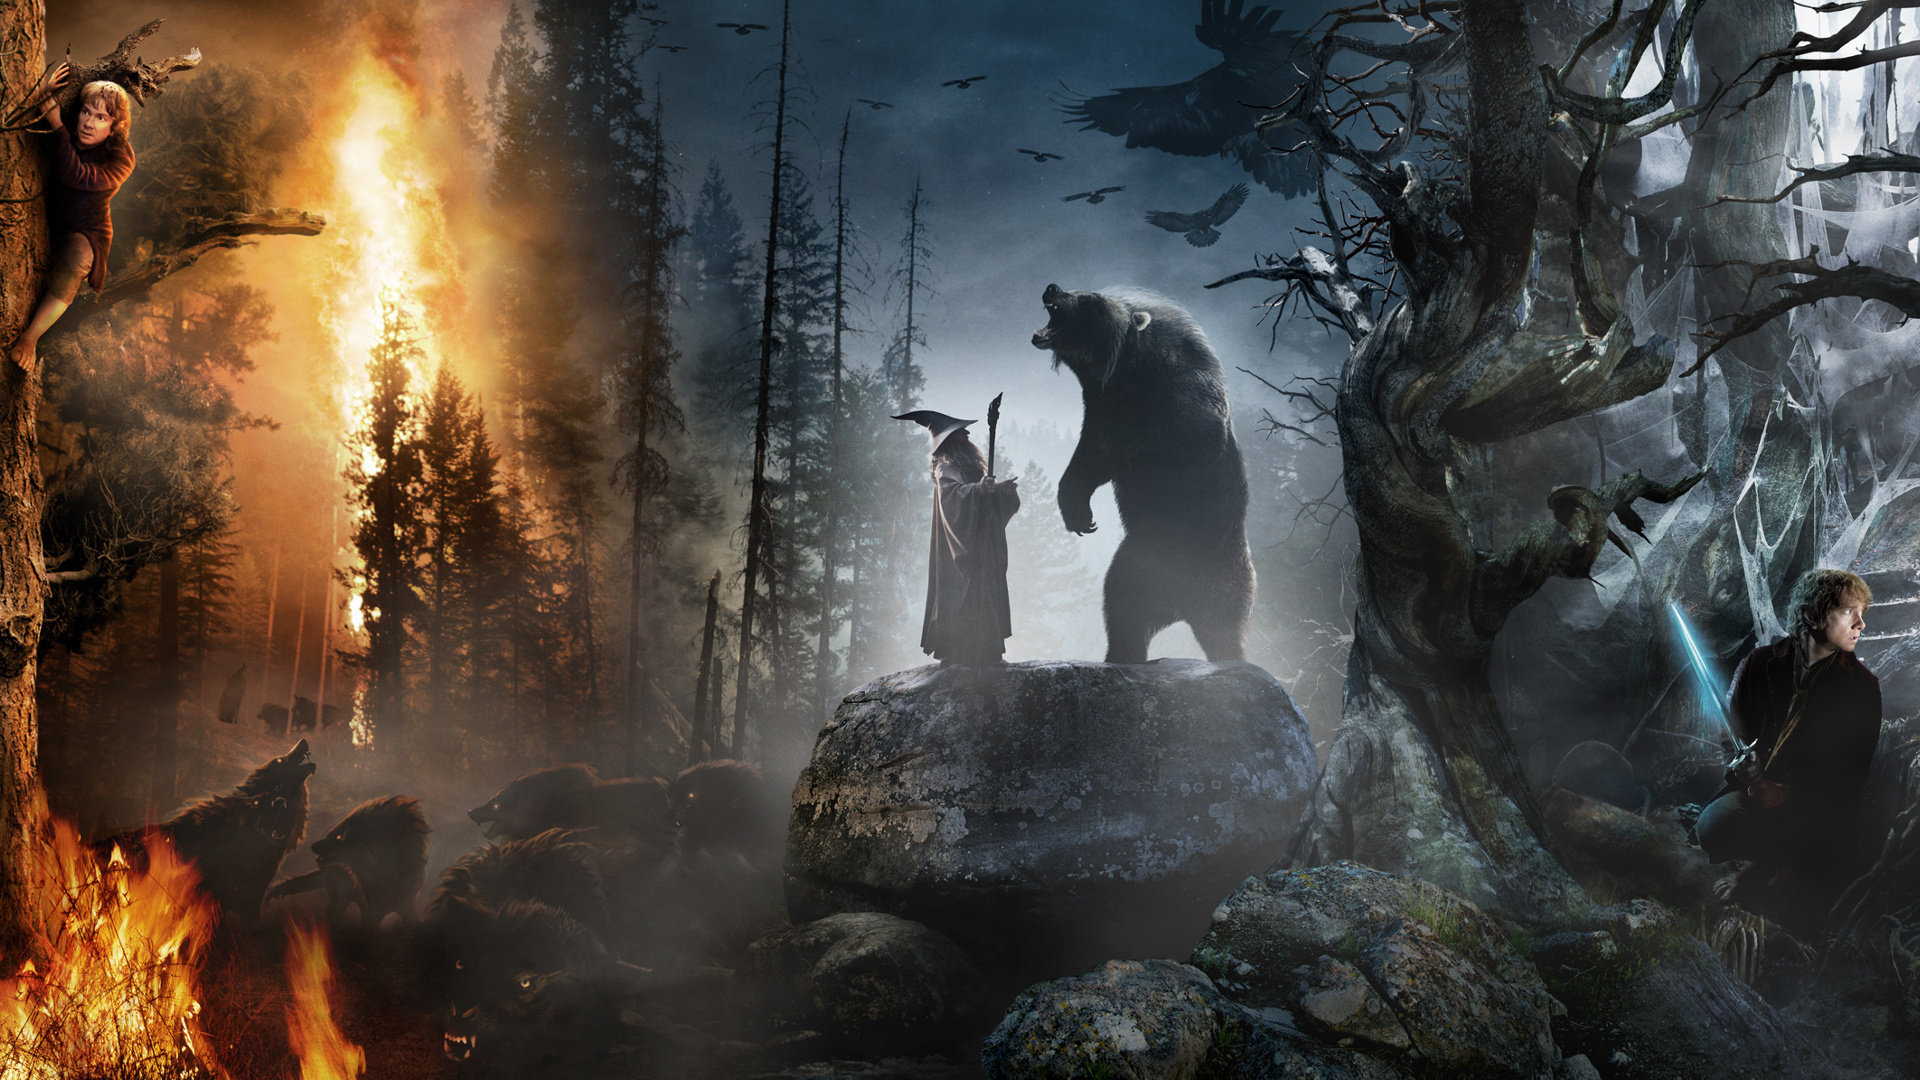 Download full hd 1920x1080 The Hobbit: An Unexpected Journey desktop background ID:463966 for free